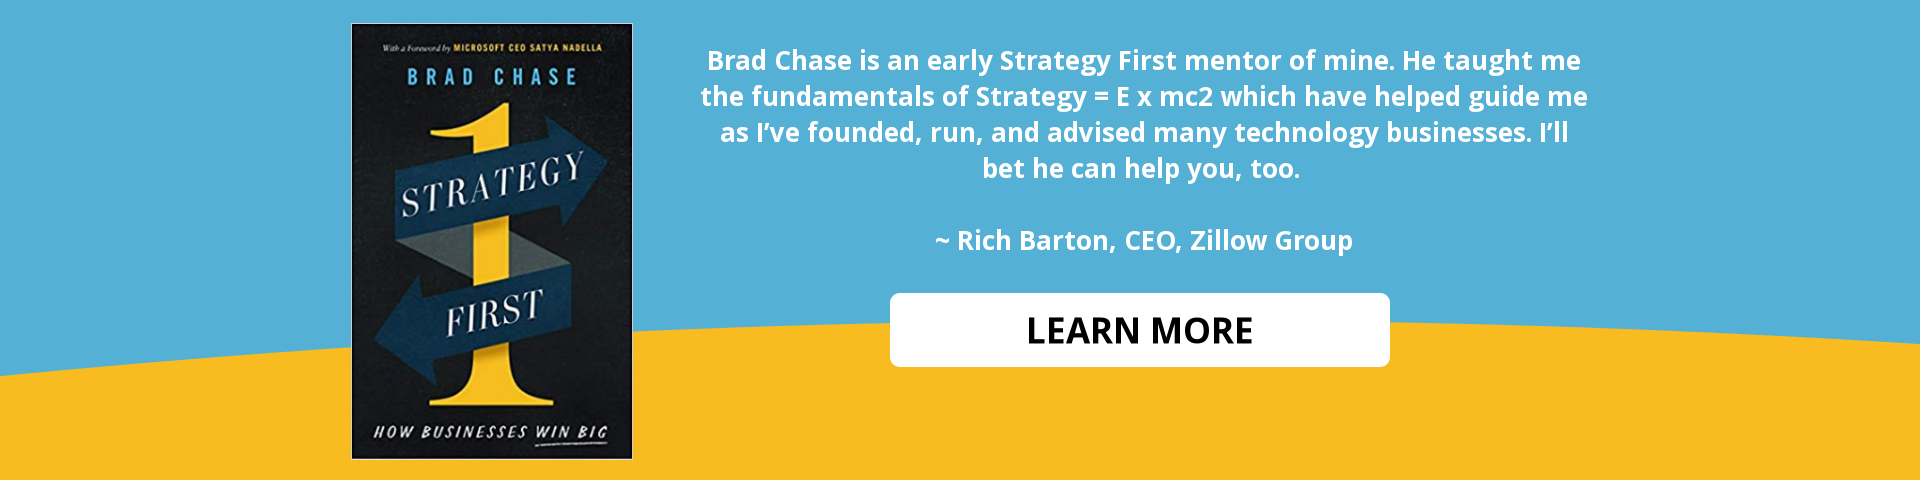 Strategy First by Brad Chase